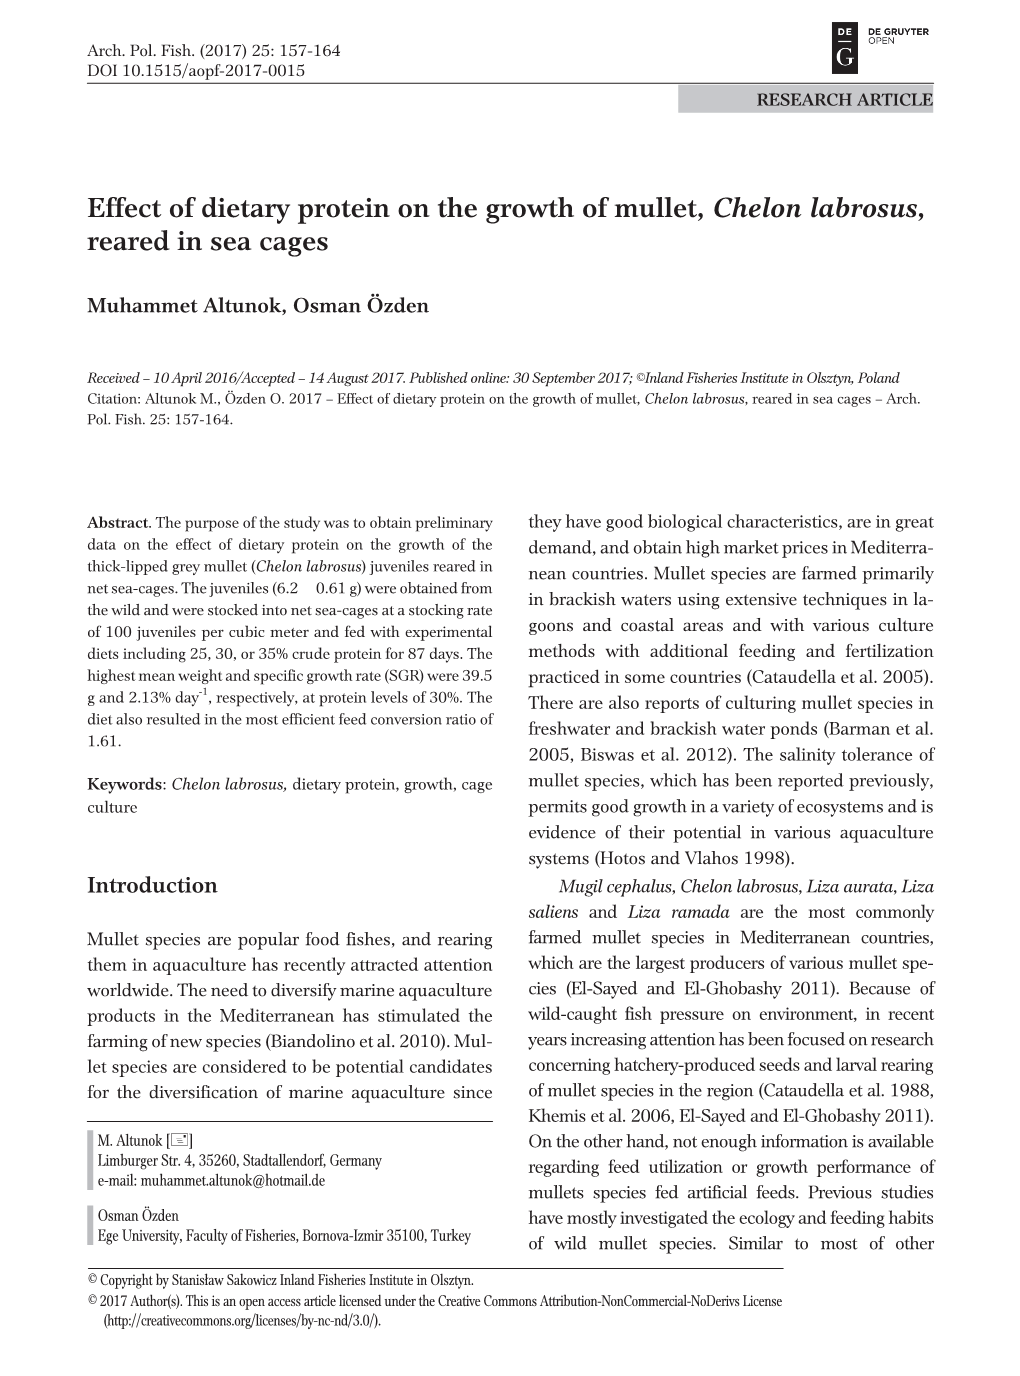 Effect of Dietary Protein on the Growth of Mullet, Chelon Labrosus, Reared in Sea Cages